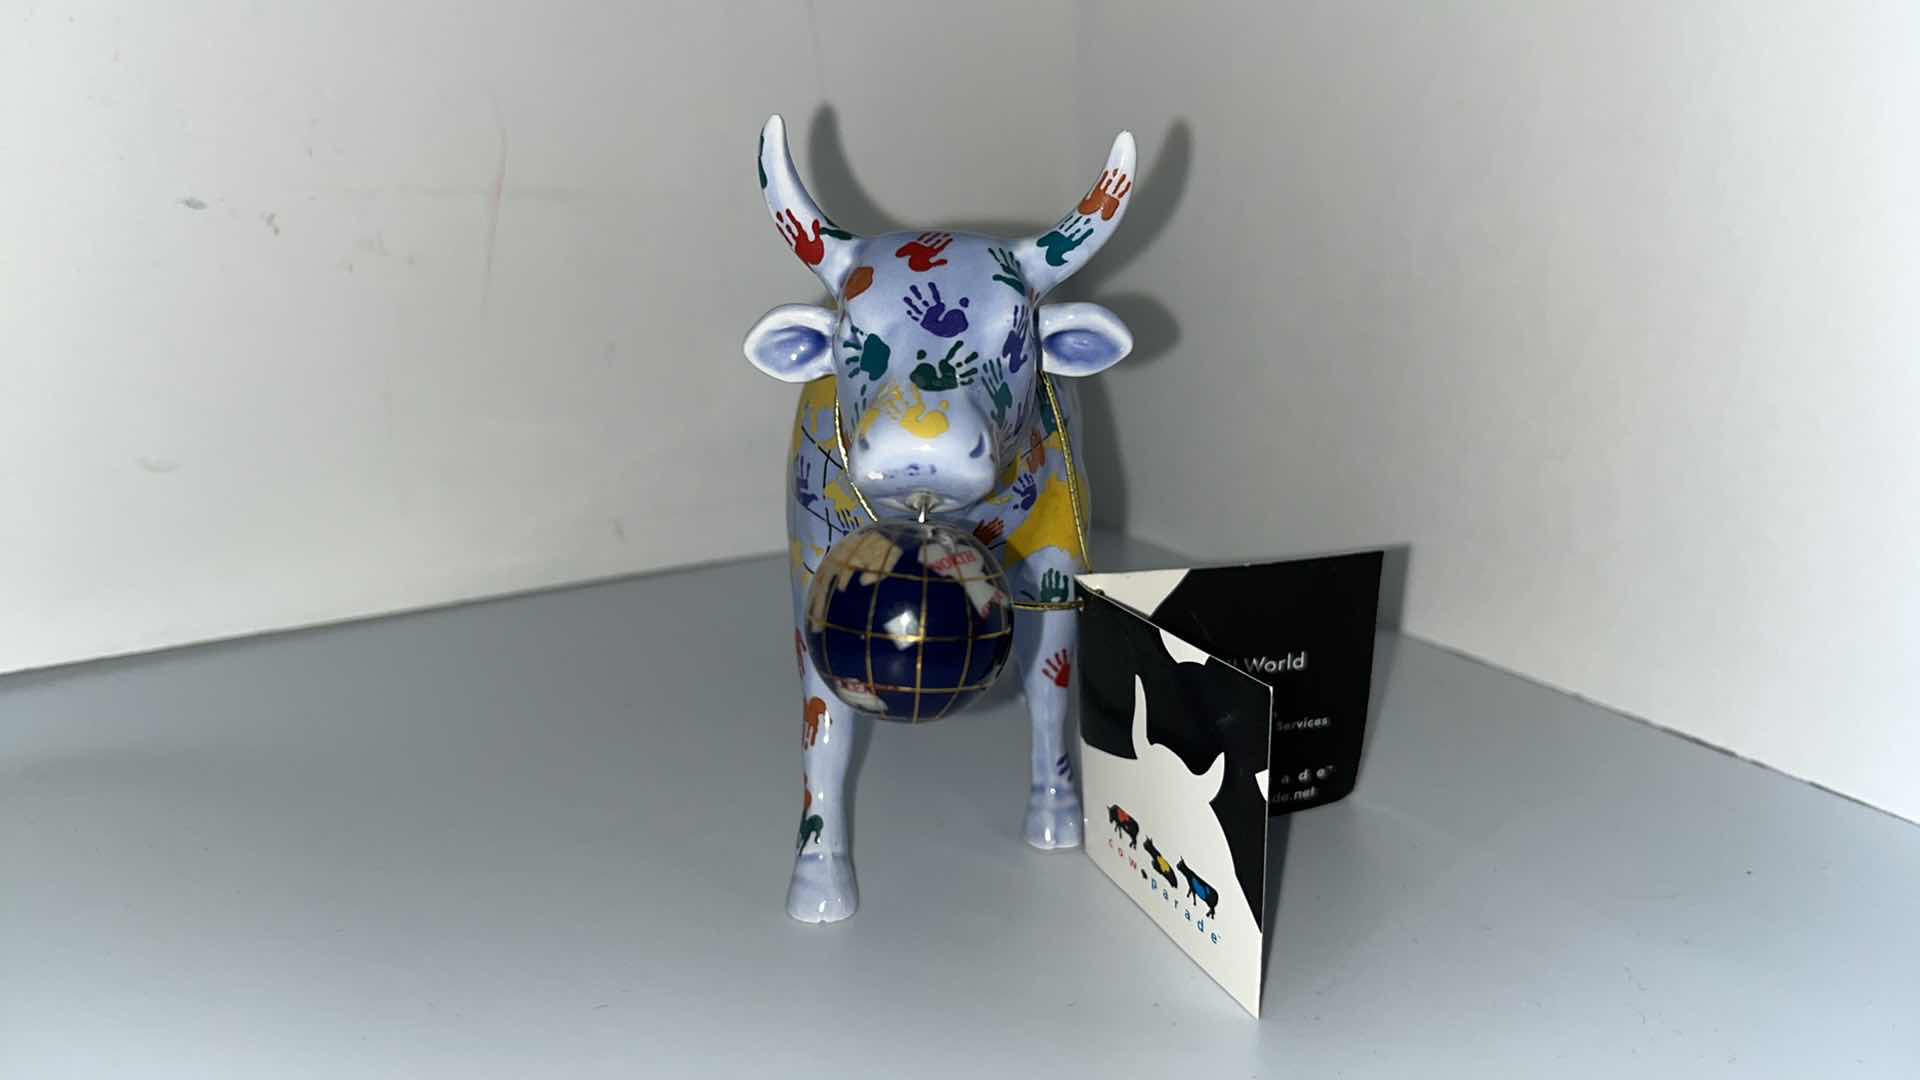 Photo 3 of WESTLAND GIFTWARE COW PARADE IT’S A SMOOLL WORLD FIGURINE 2002 (7312)